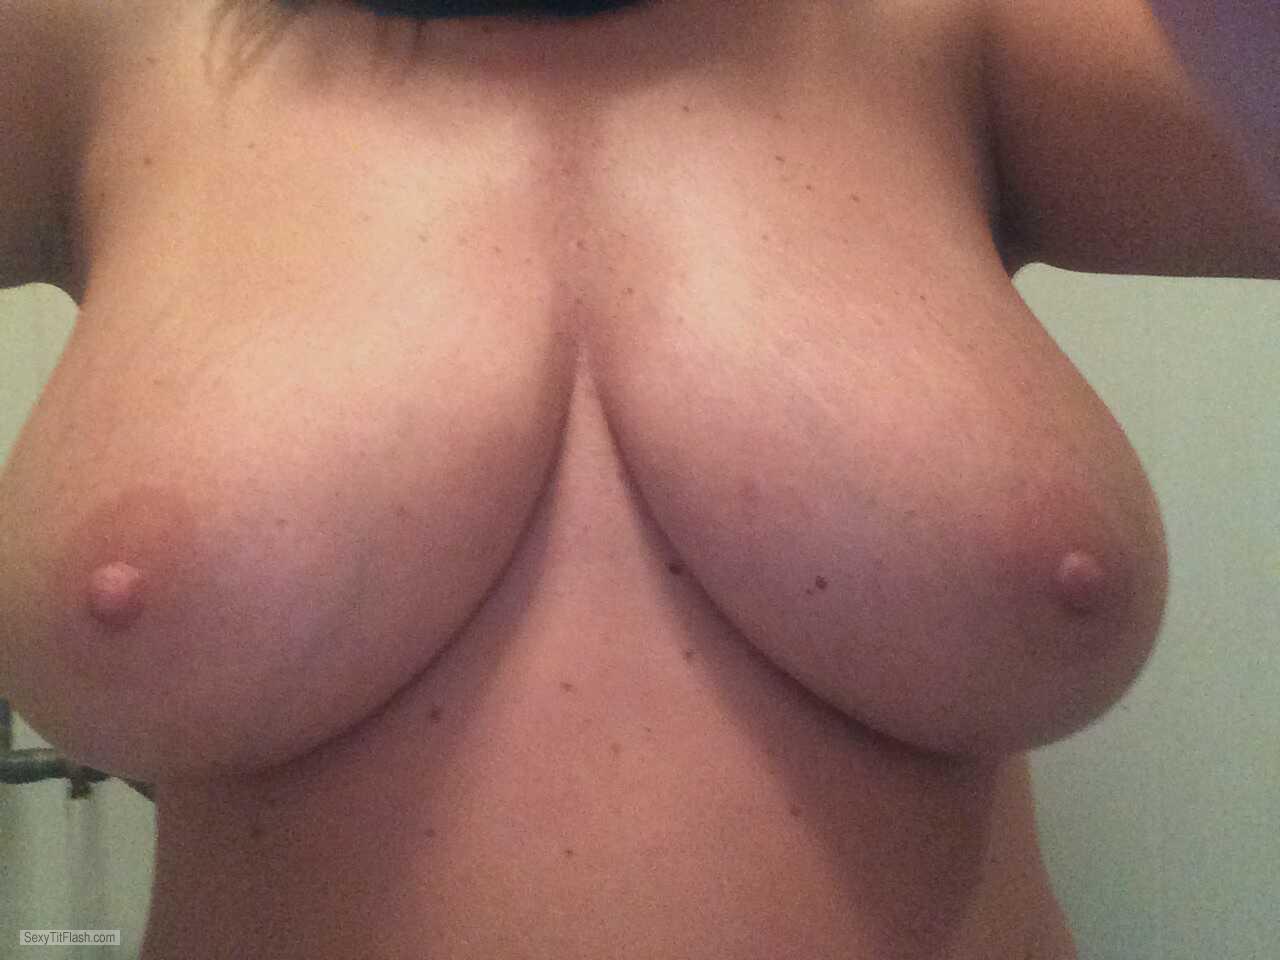 Tit Flash: My Very Big Tits (Selfie) - Big Natural from United States